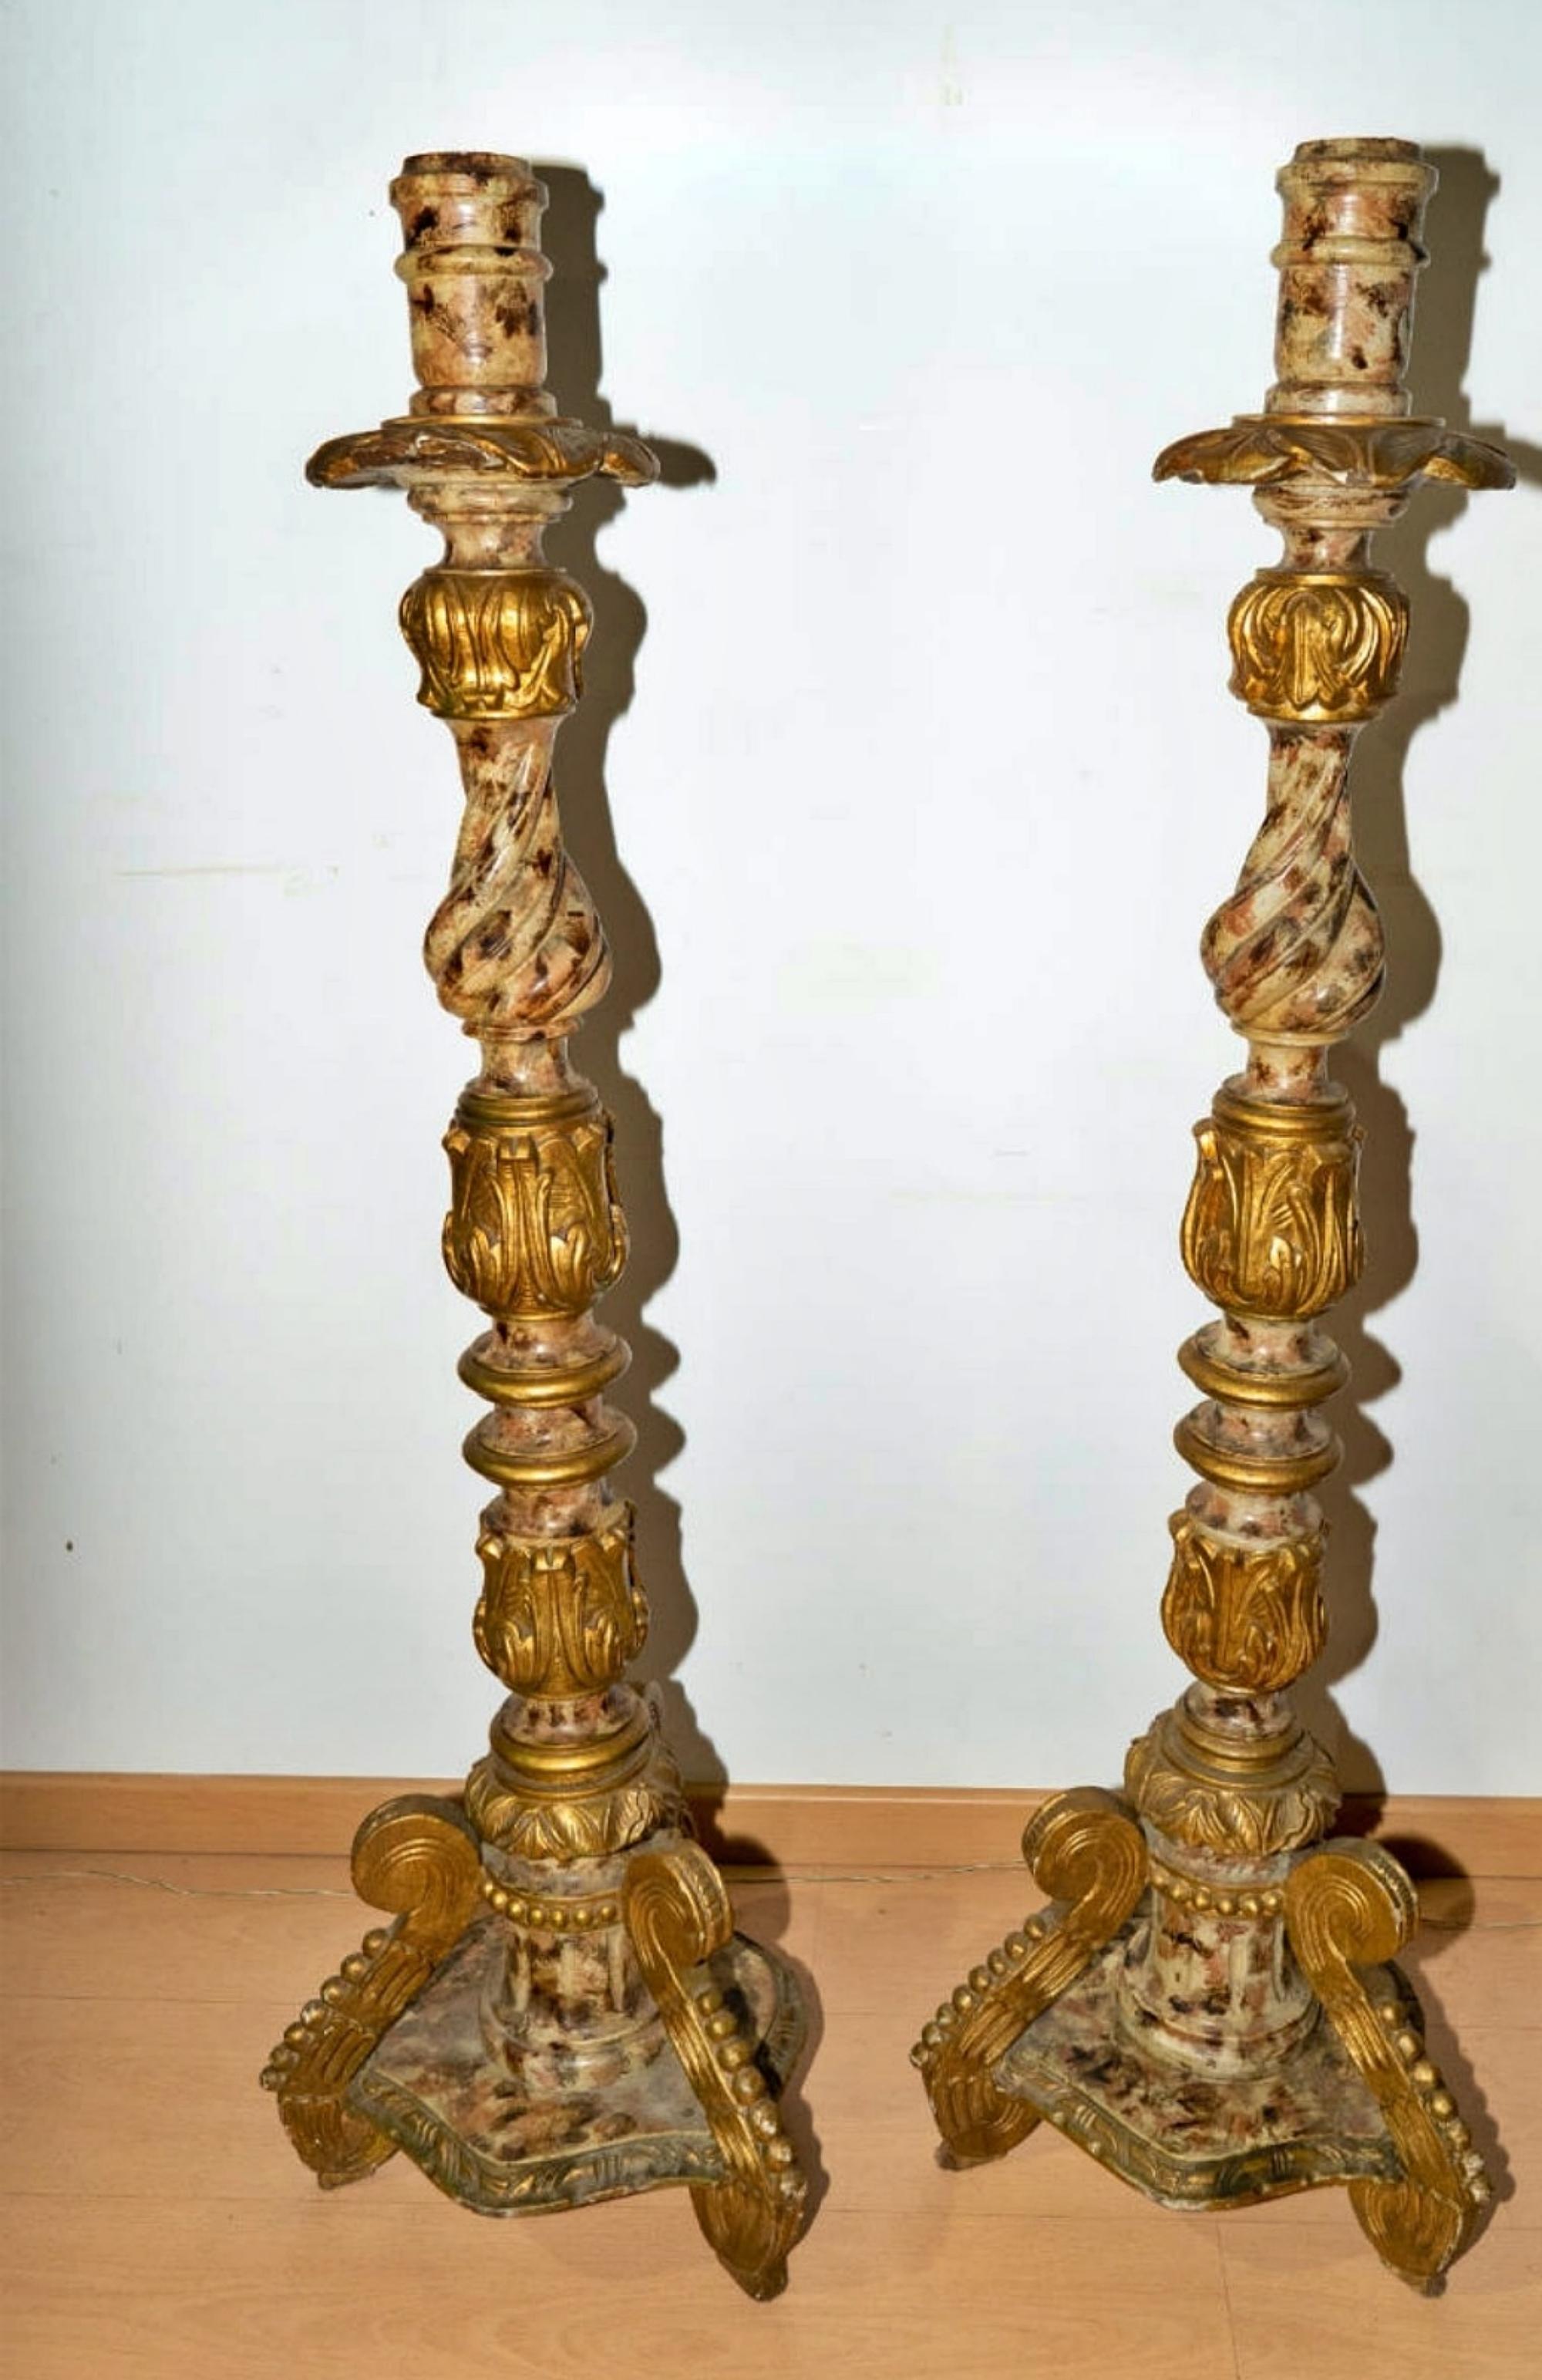 Pair of Spanish candlesticks from the 18th century
Measure: height 132cm
Good conditions.